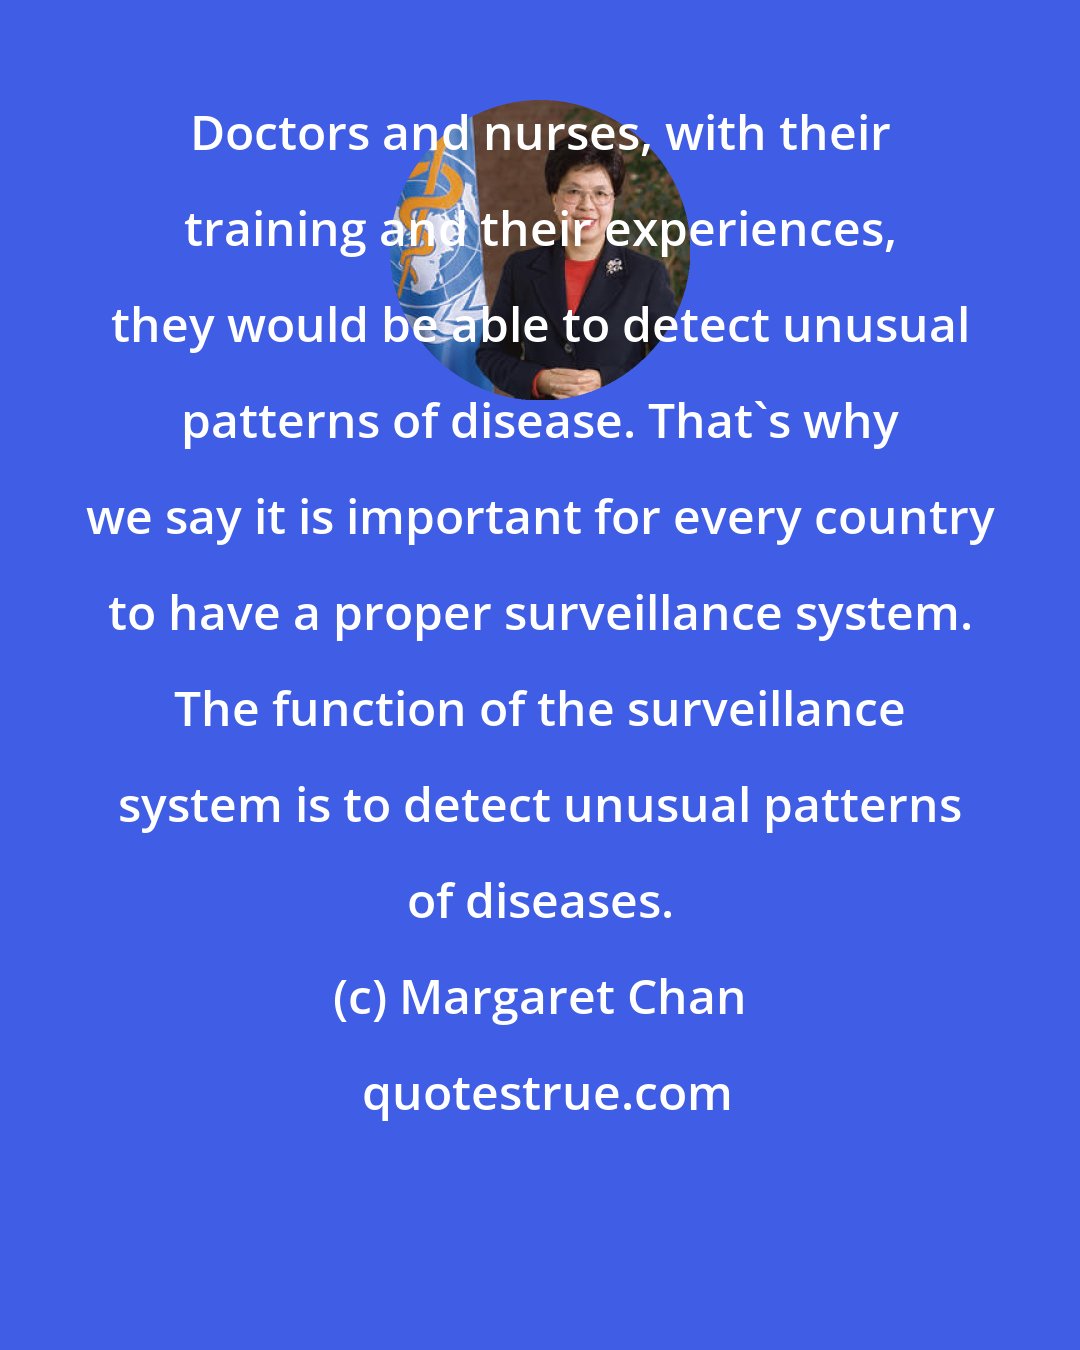 Margaret Chan: Doctors and nurses, with their training and their experiences, they would be able to detect unusual patterns of disease. That's why we say it is important for every country to have a proper surveillance system. The function of the surveillance system is to detect unusual patterns of diseases.